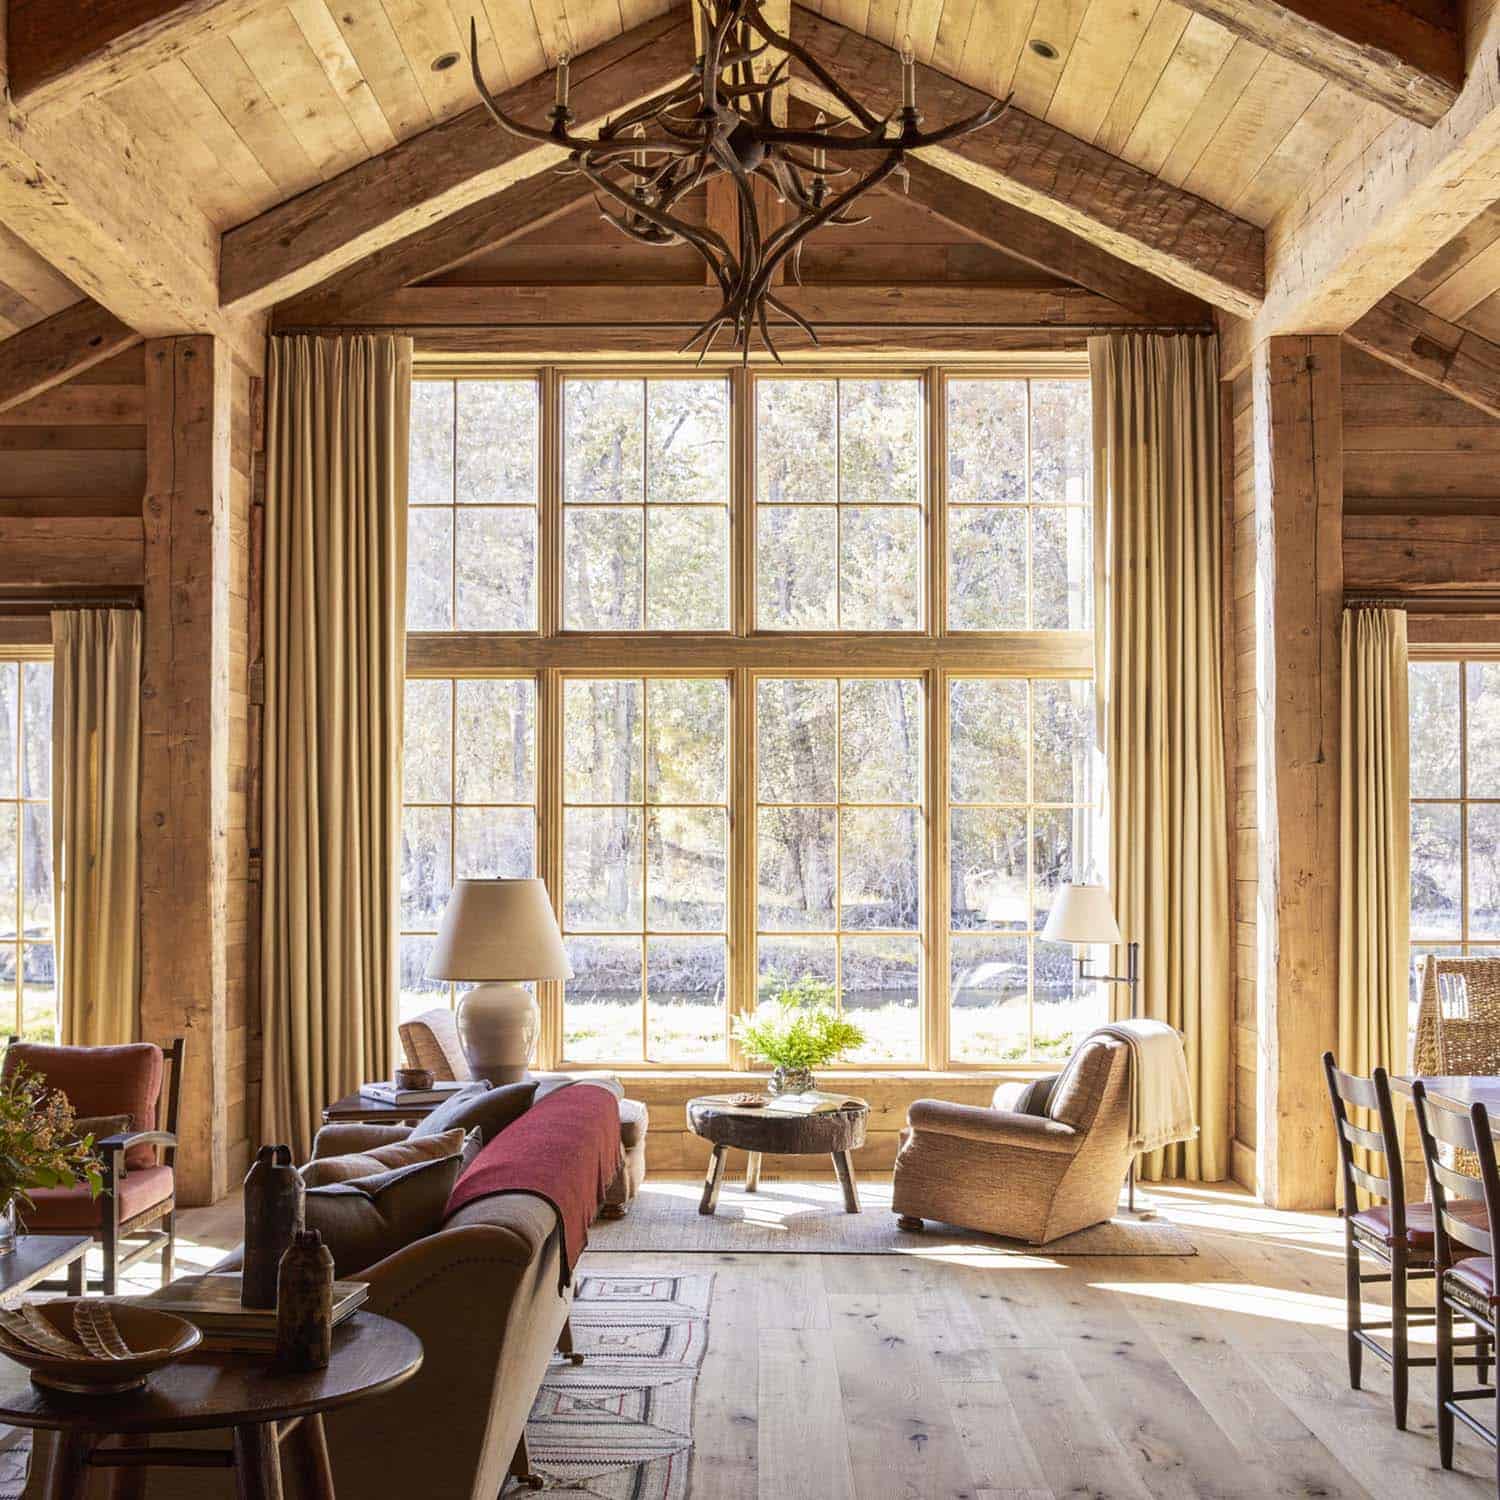 rustic style living room with tall ceilings